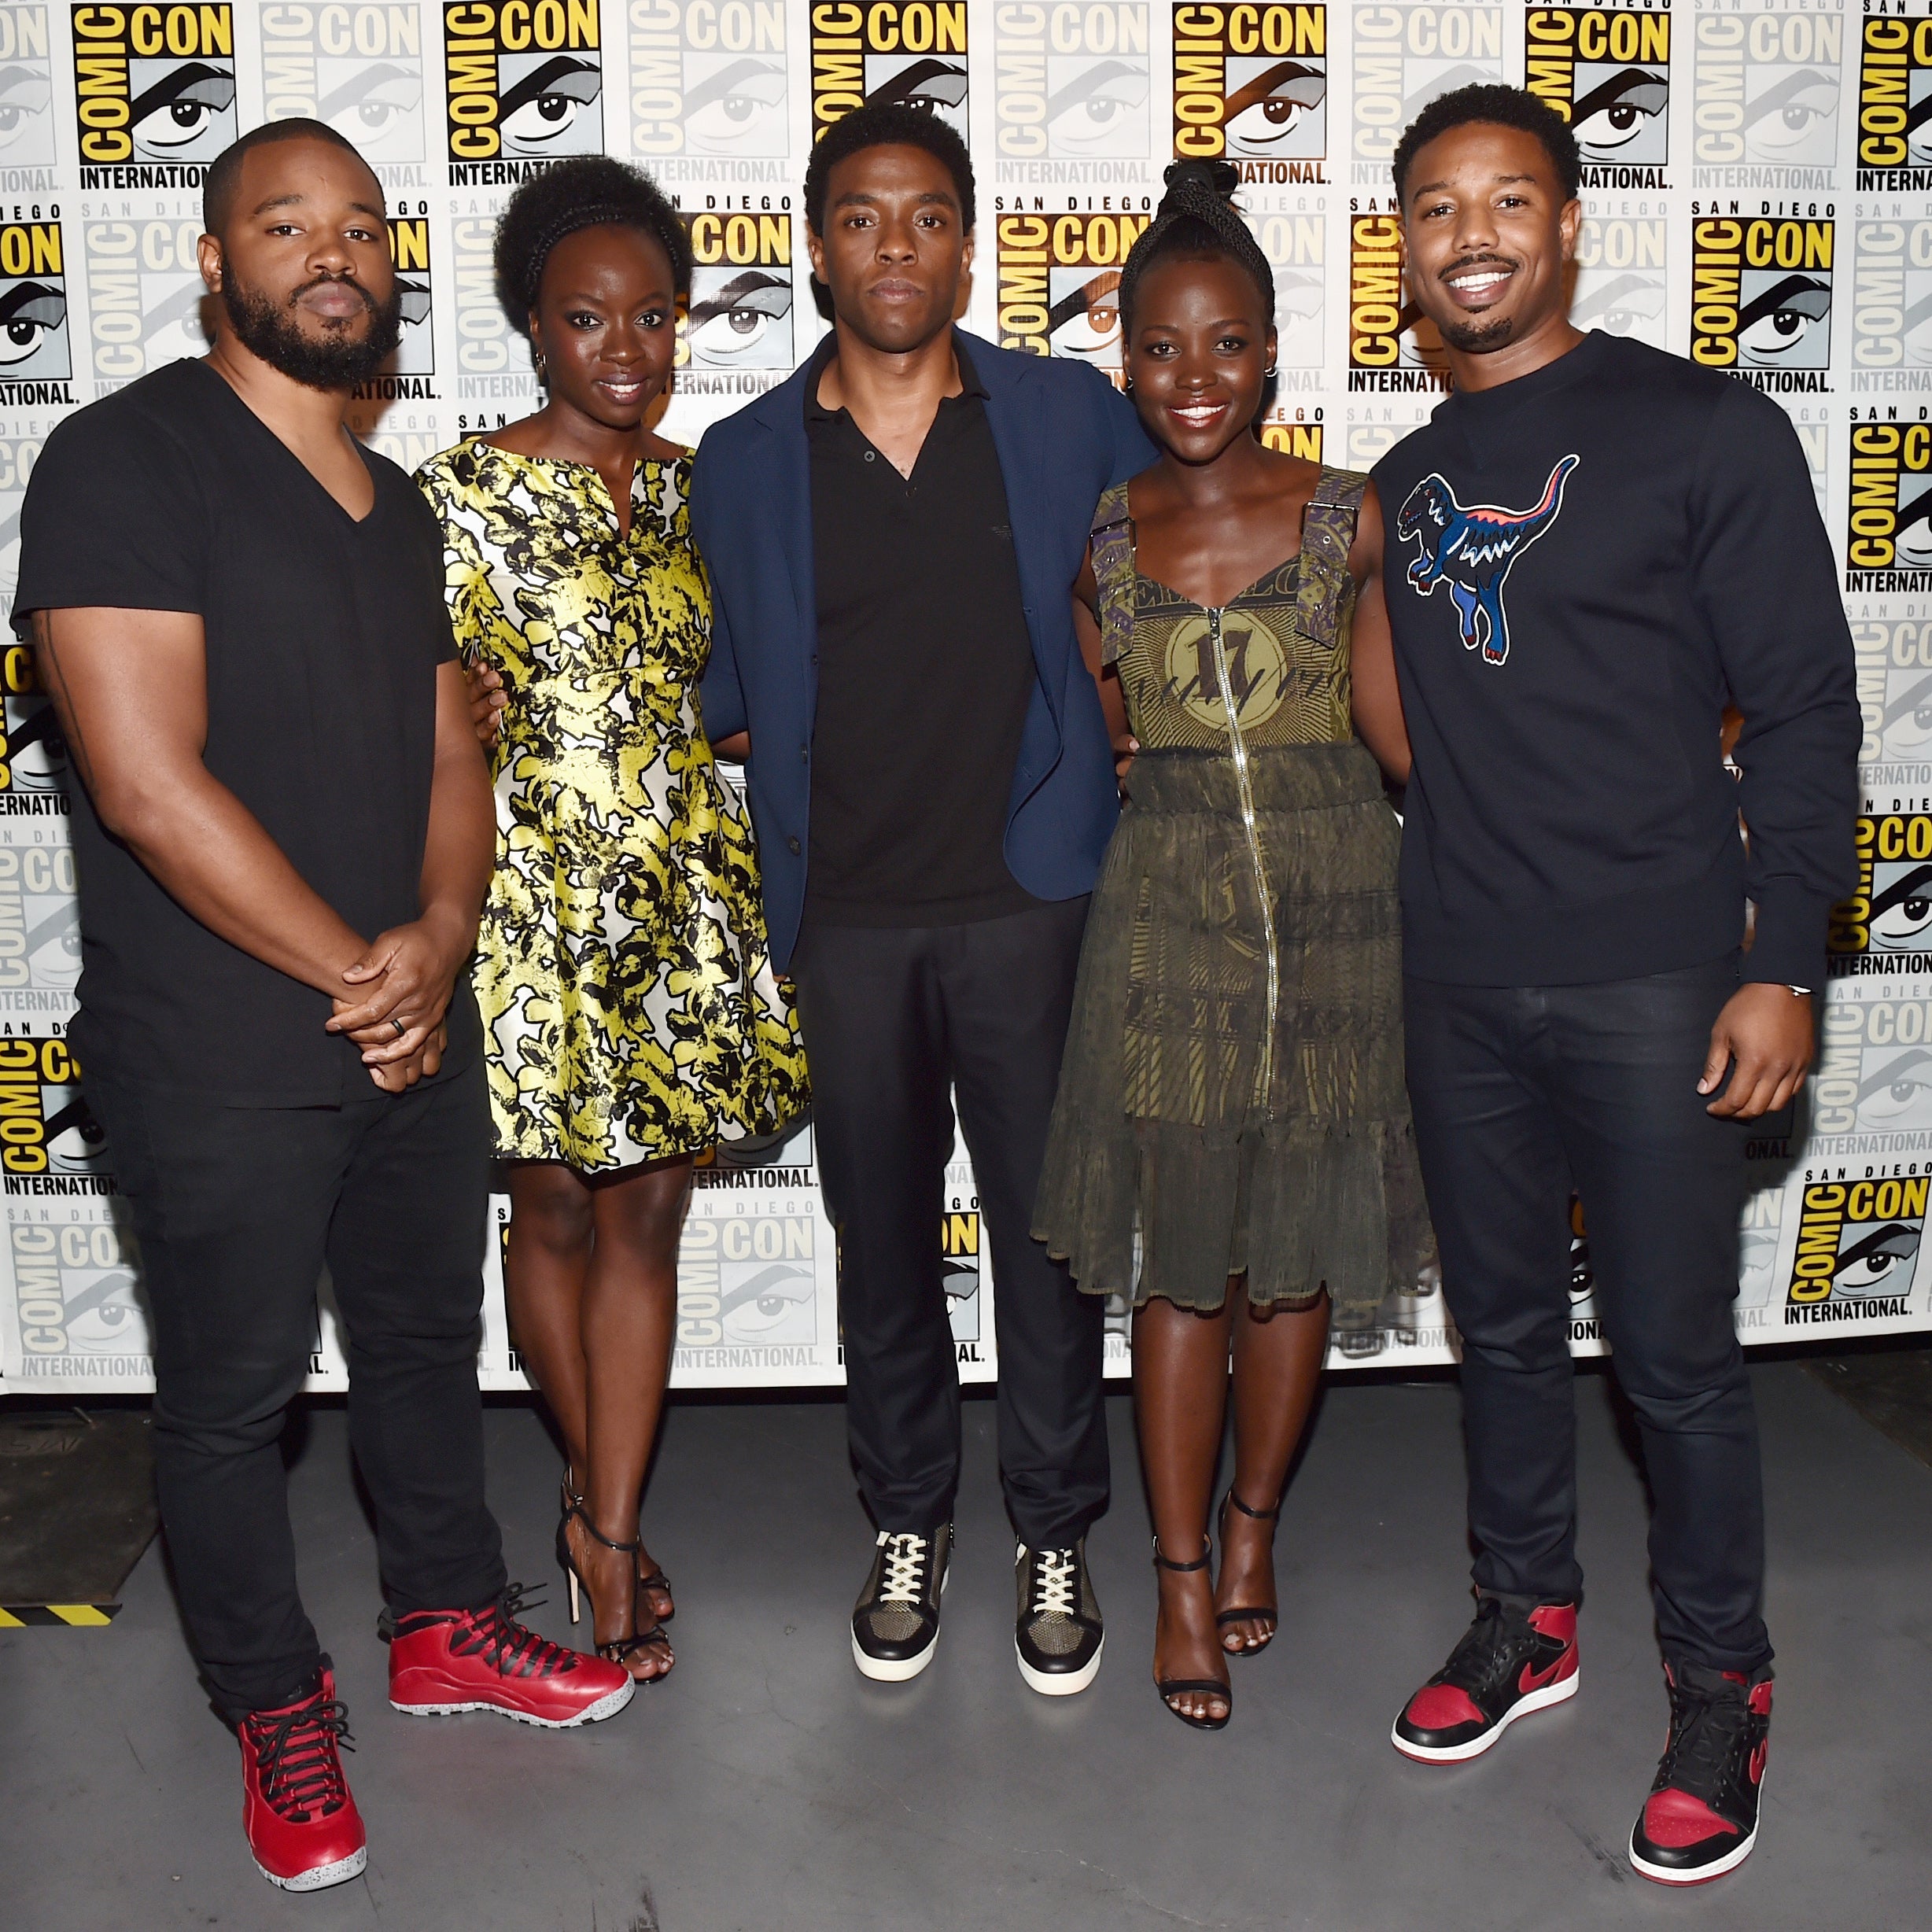 Comic-Con 2016: The Cast of 'Black Panther,' Zendaya, Will Smith and More!
